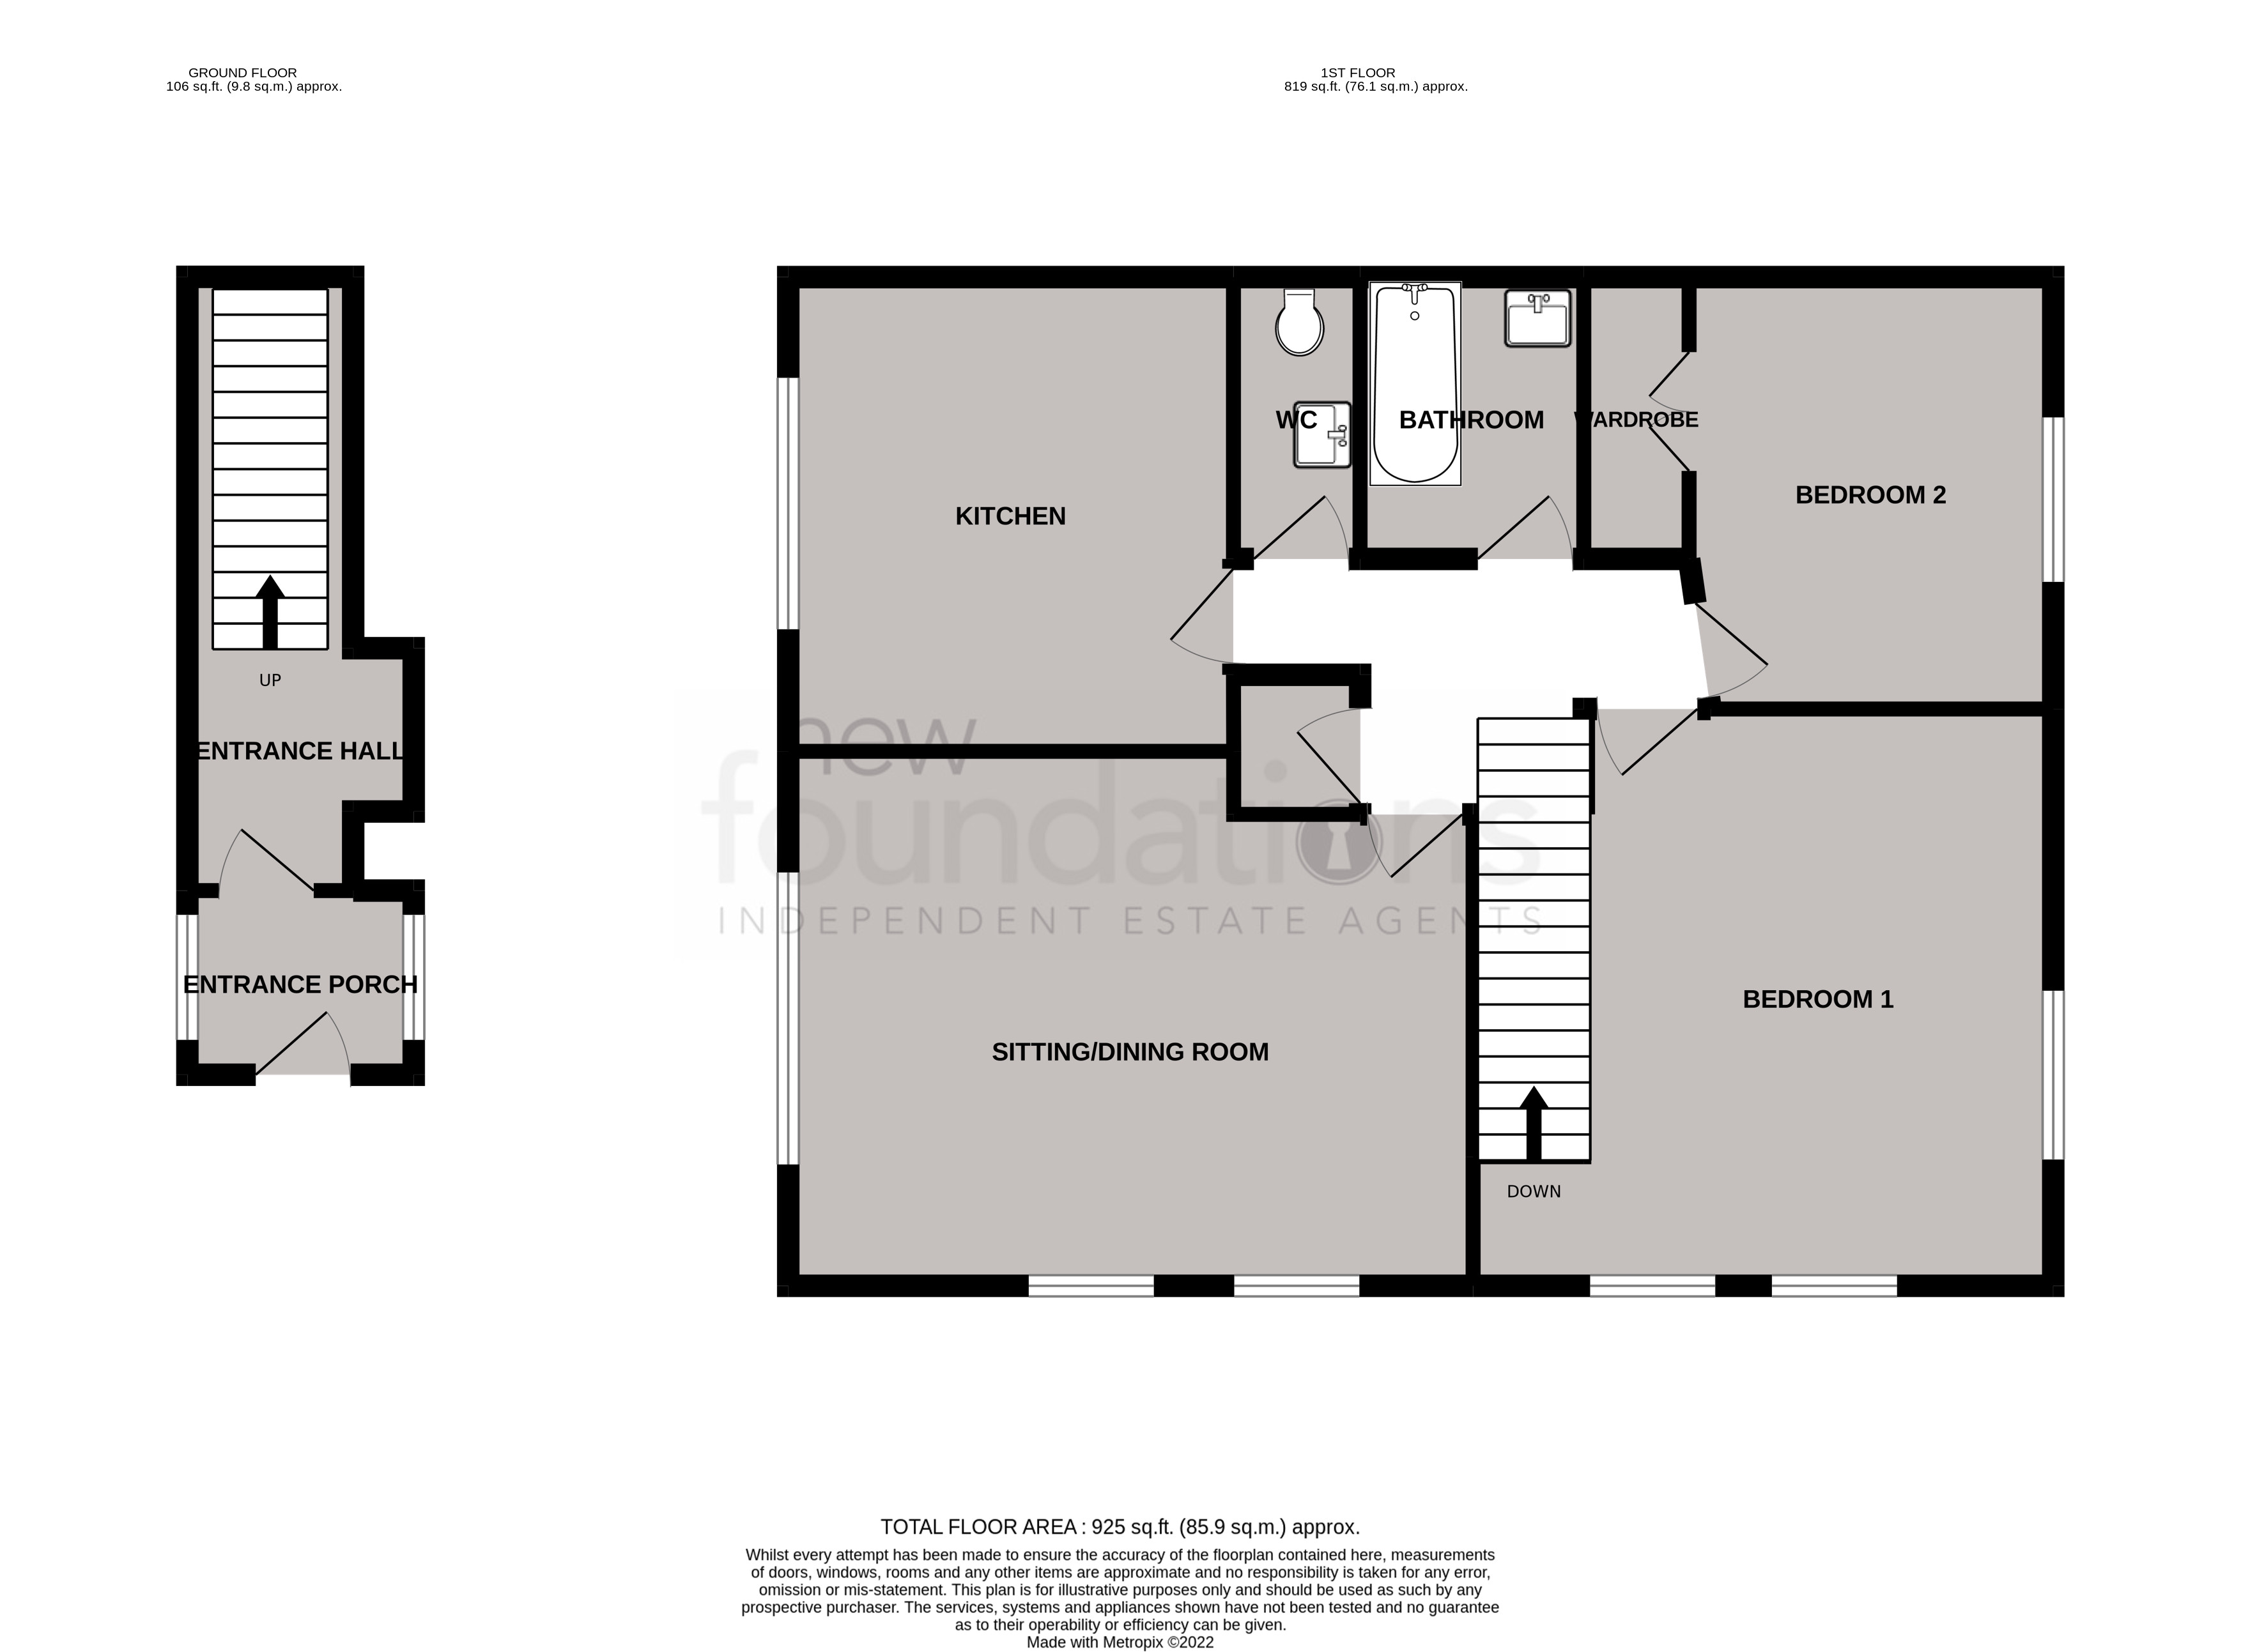 Floorplans For Collington Lane West, Bexhill-on-Sea, East Sussex